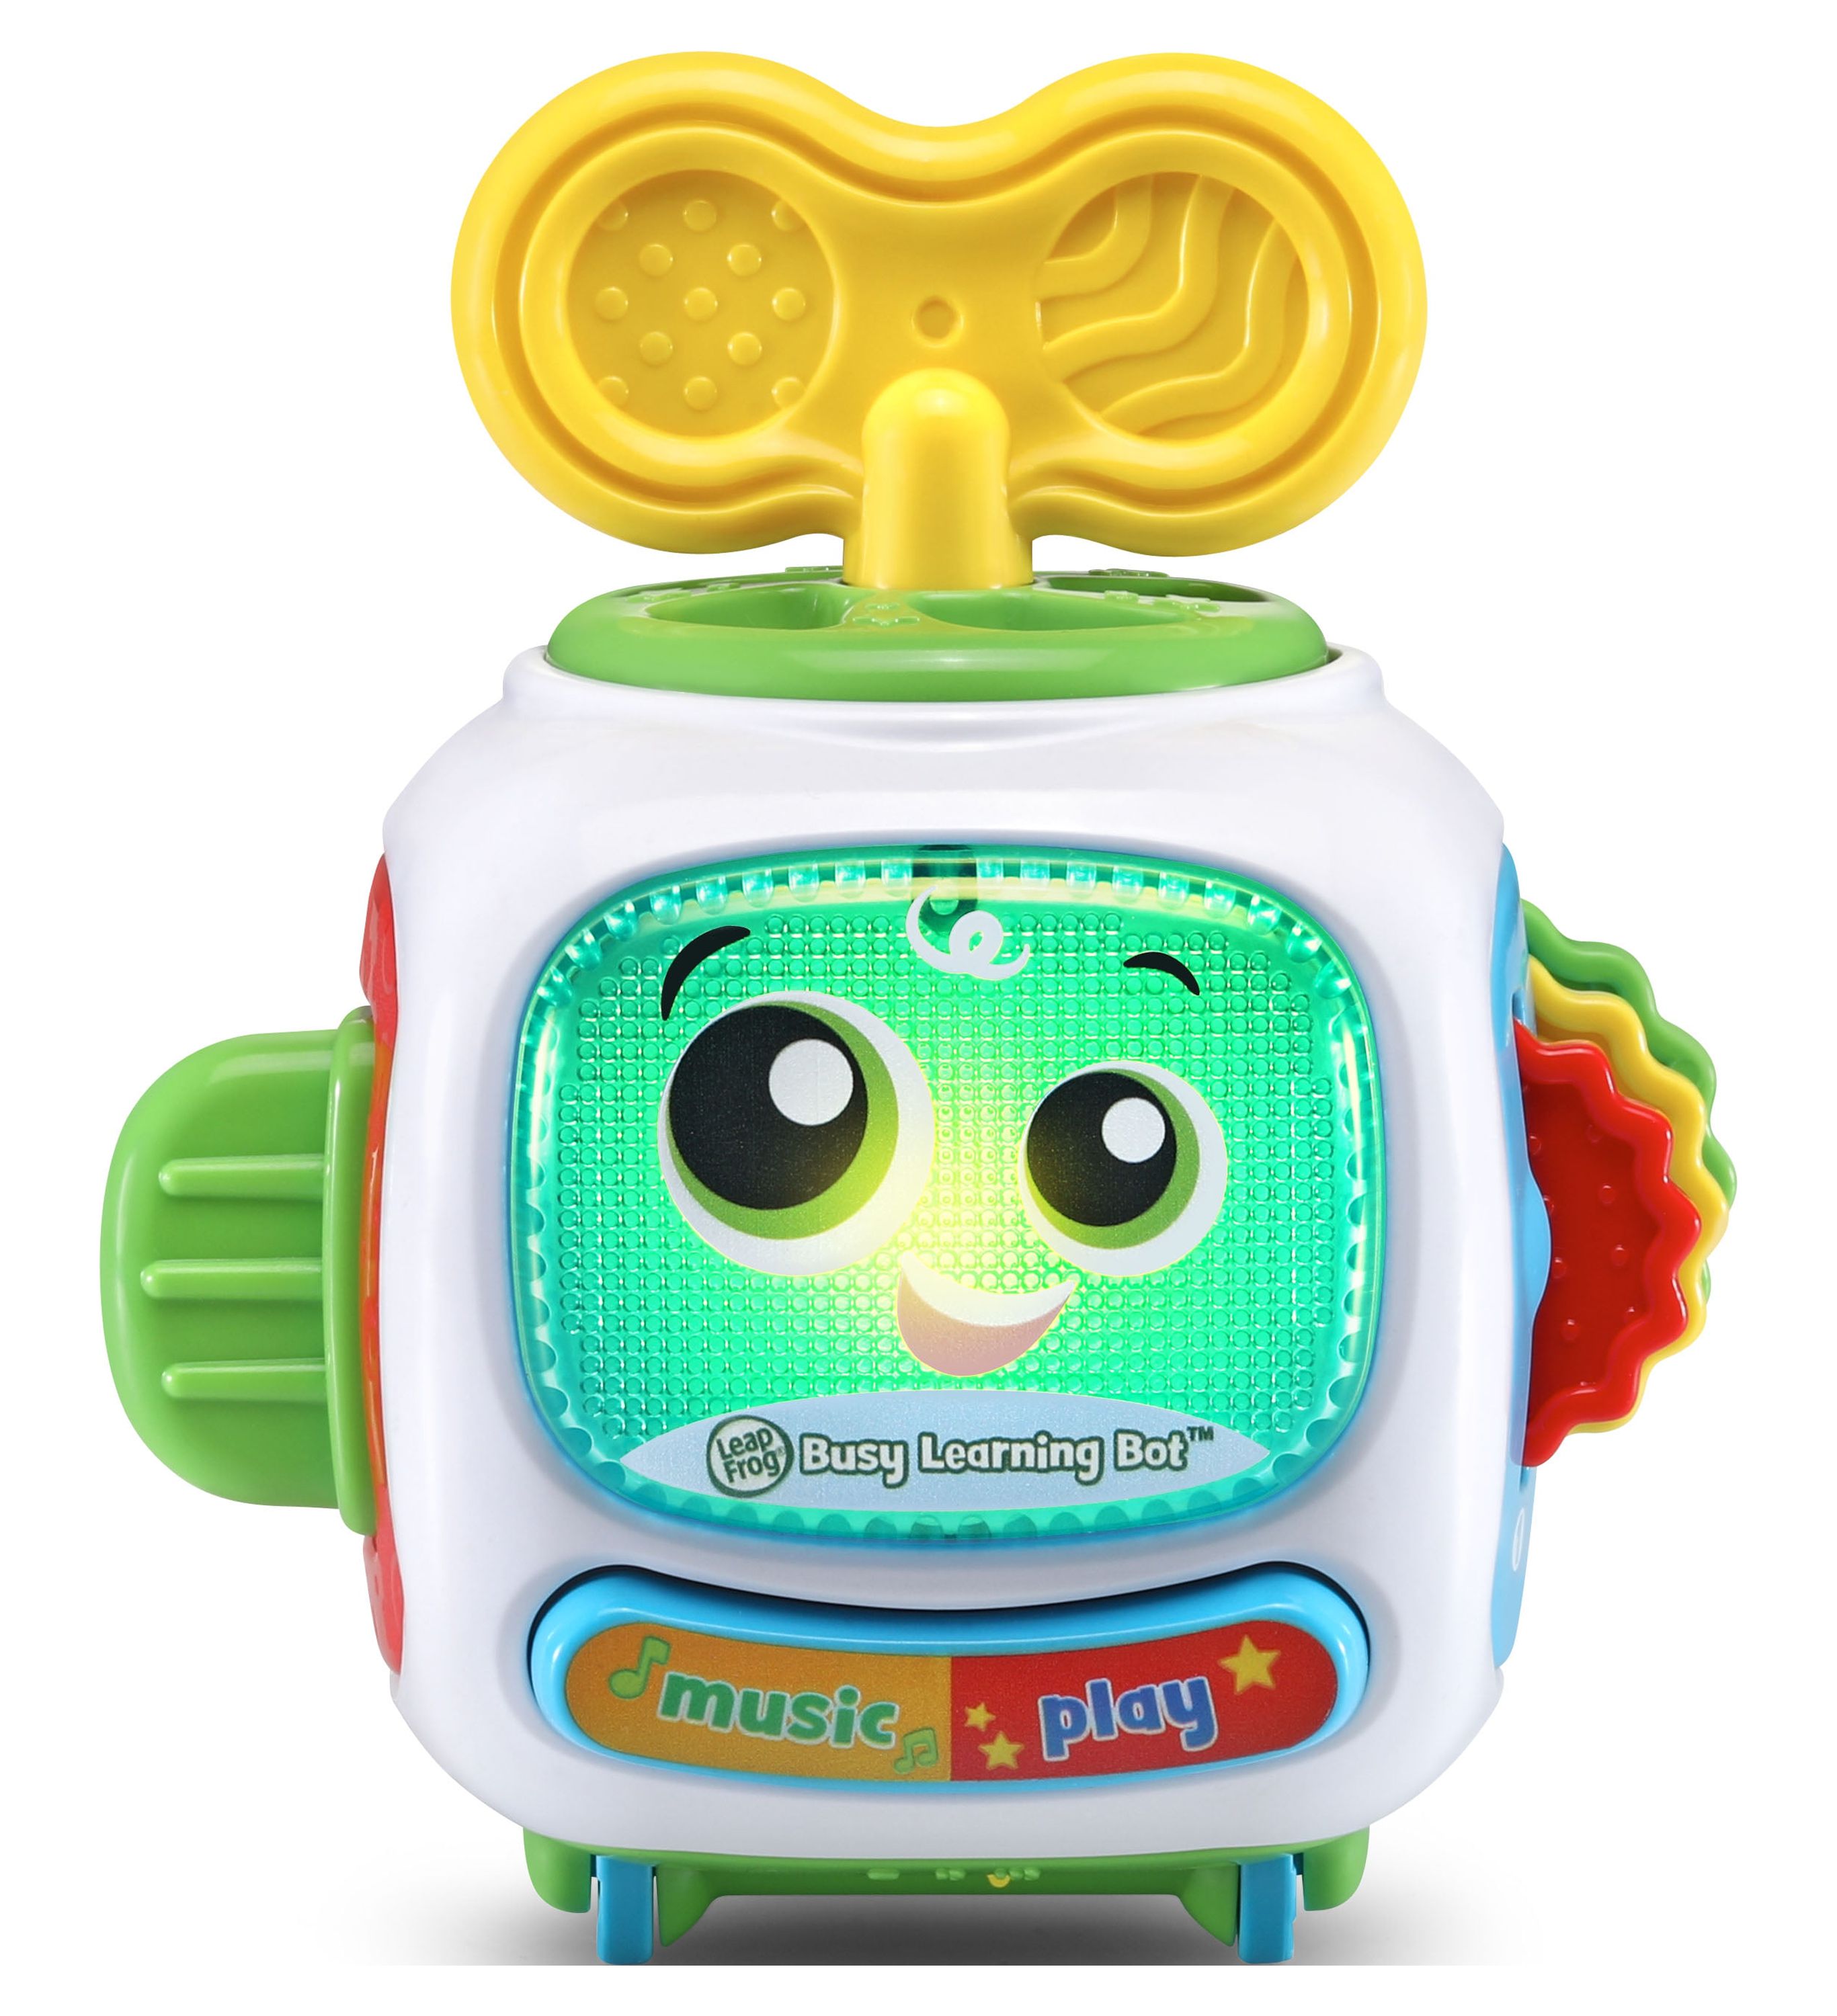 LeapFrog® Busy Learning Bot™ Interactive Motor-Sensory Robot Toy - image 1 of 10